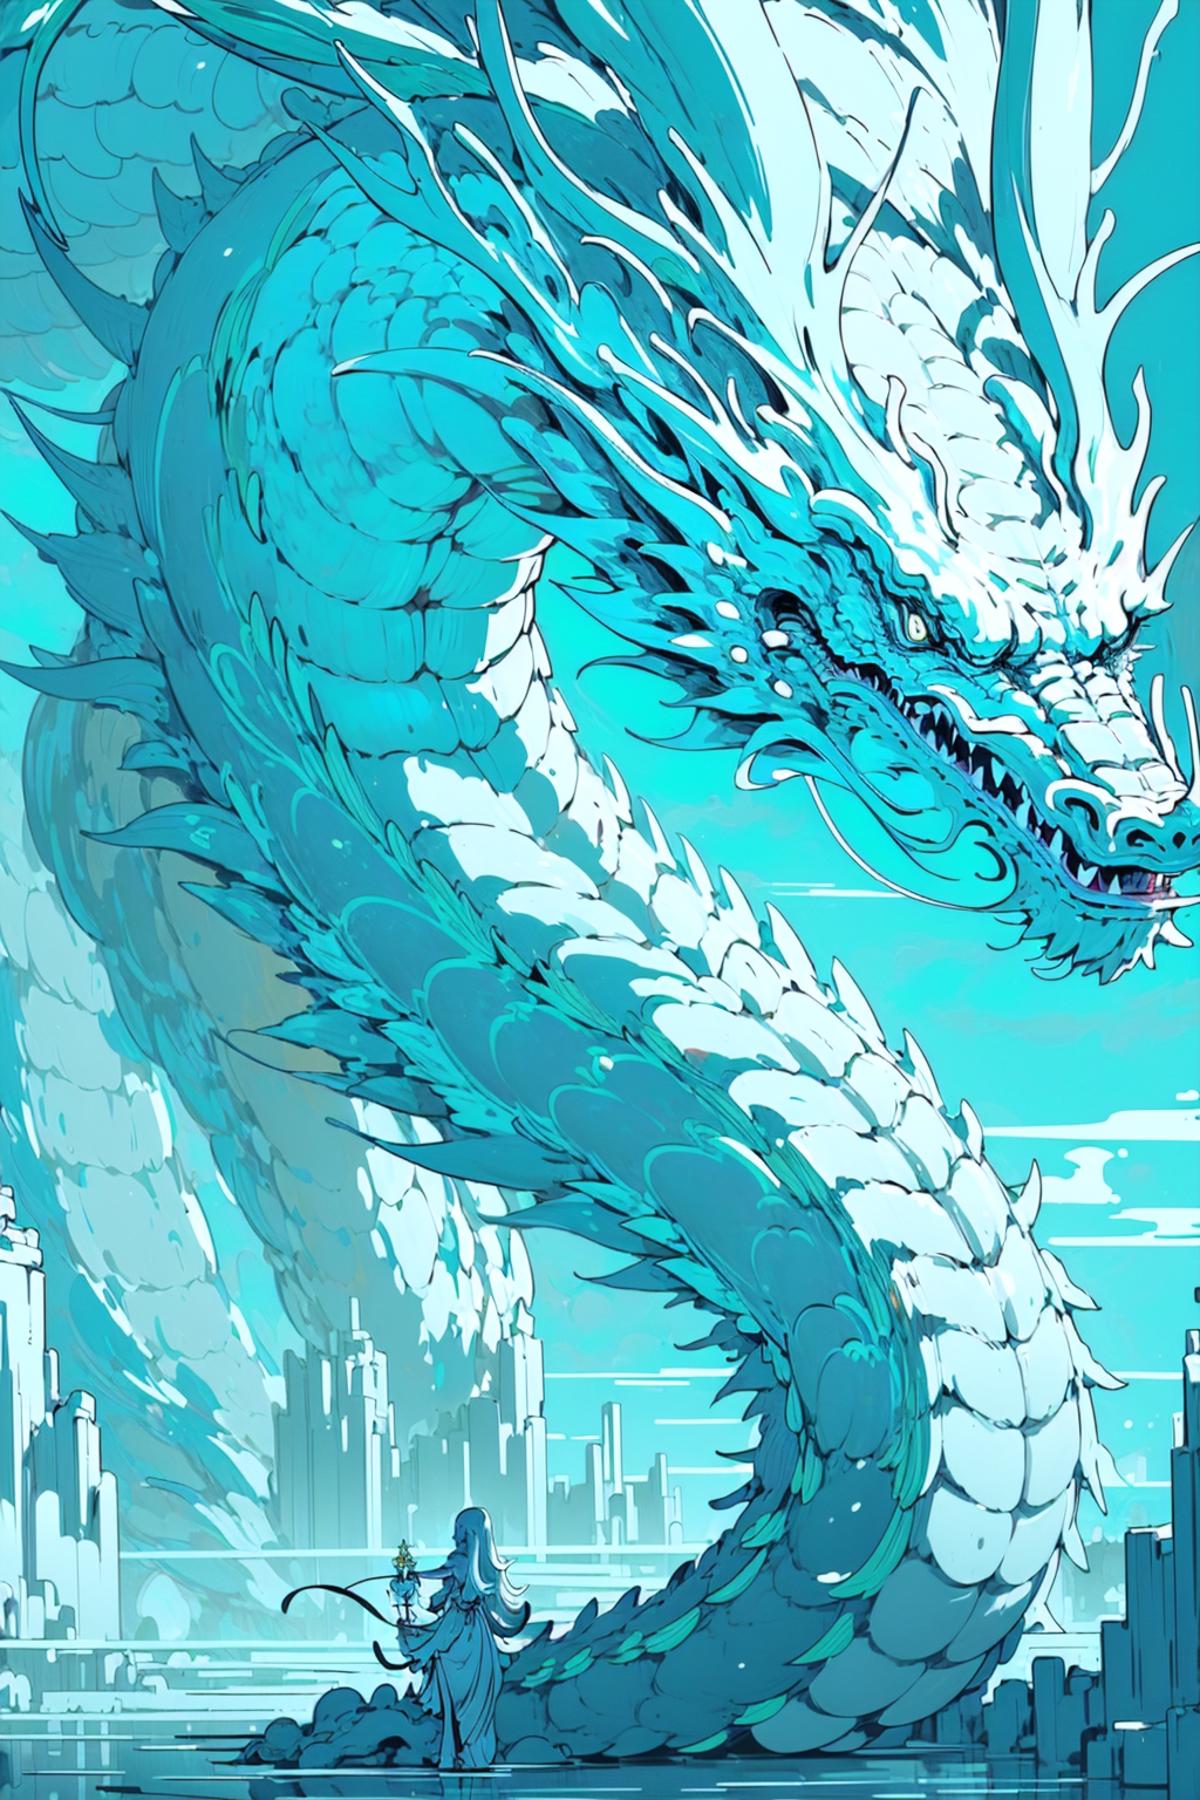 A Blue Dragon with a City Skyline in the Background